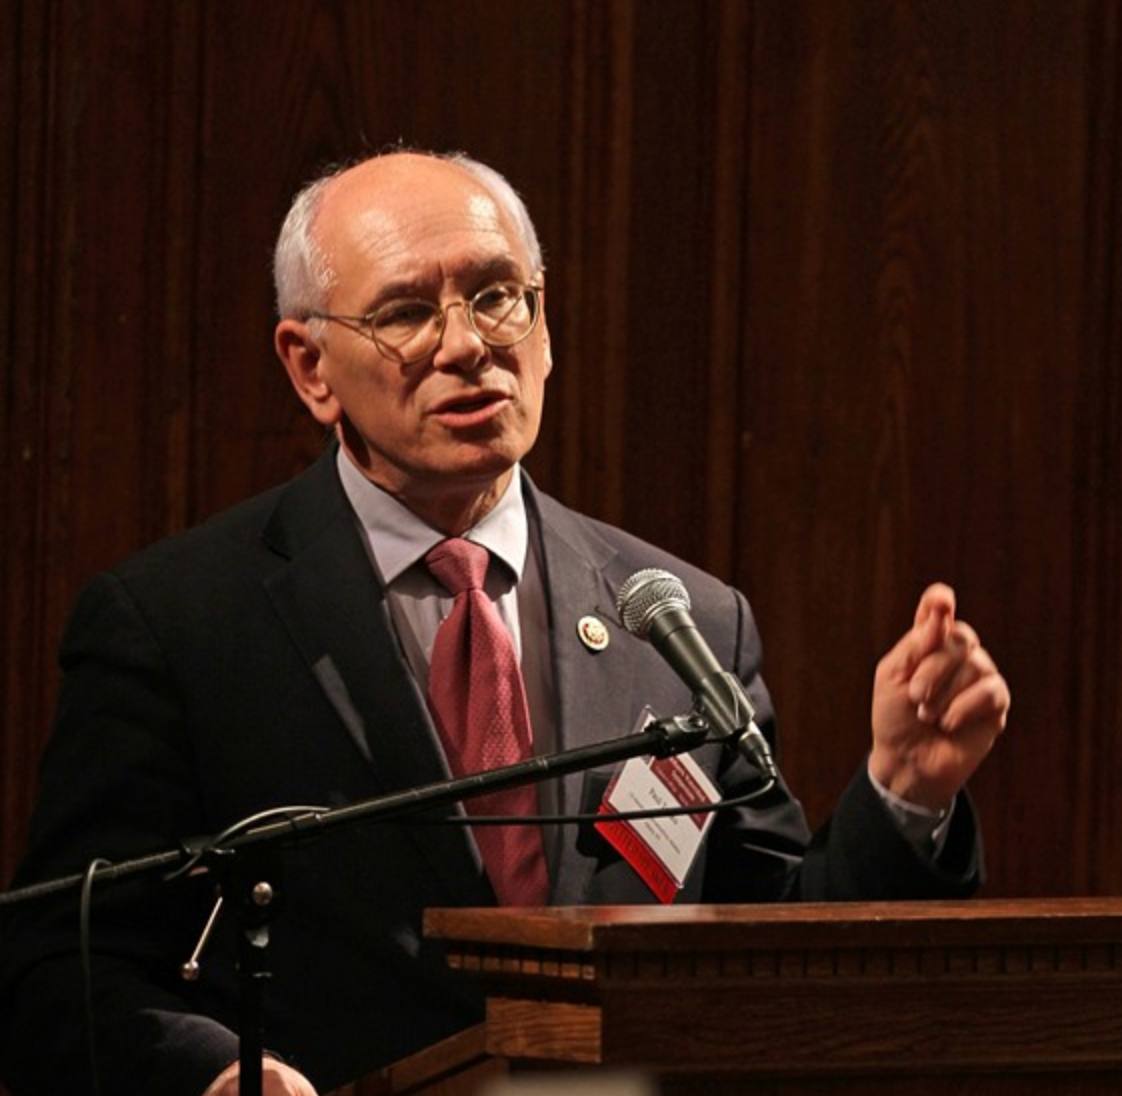 Rep. Paul Tonko (NY 20) speaking at the Mohawk Watershed Symposium